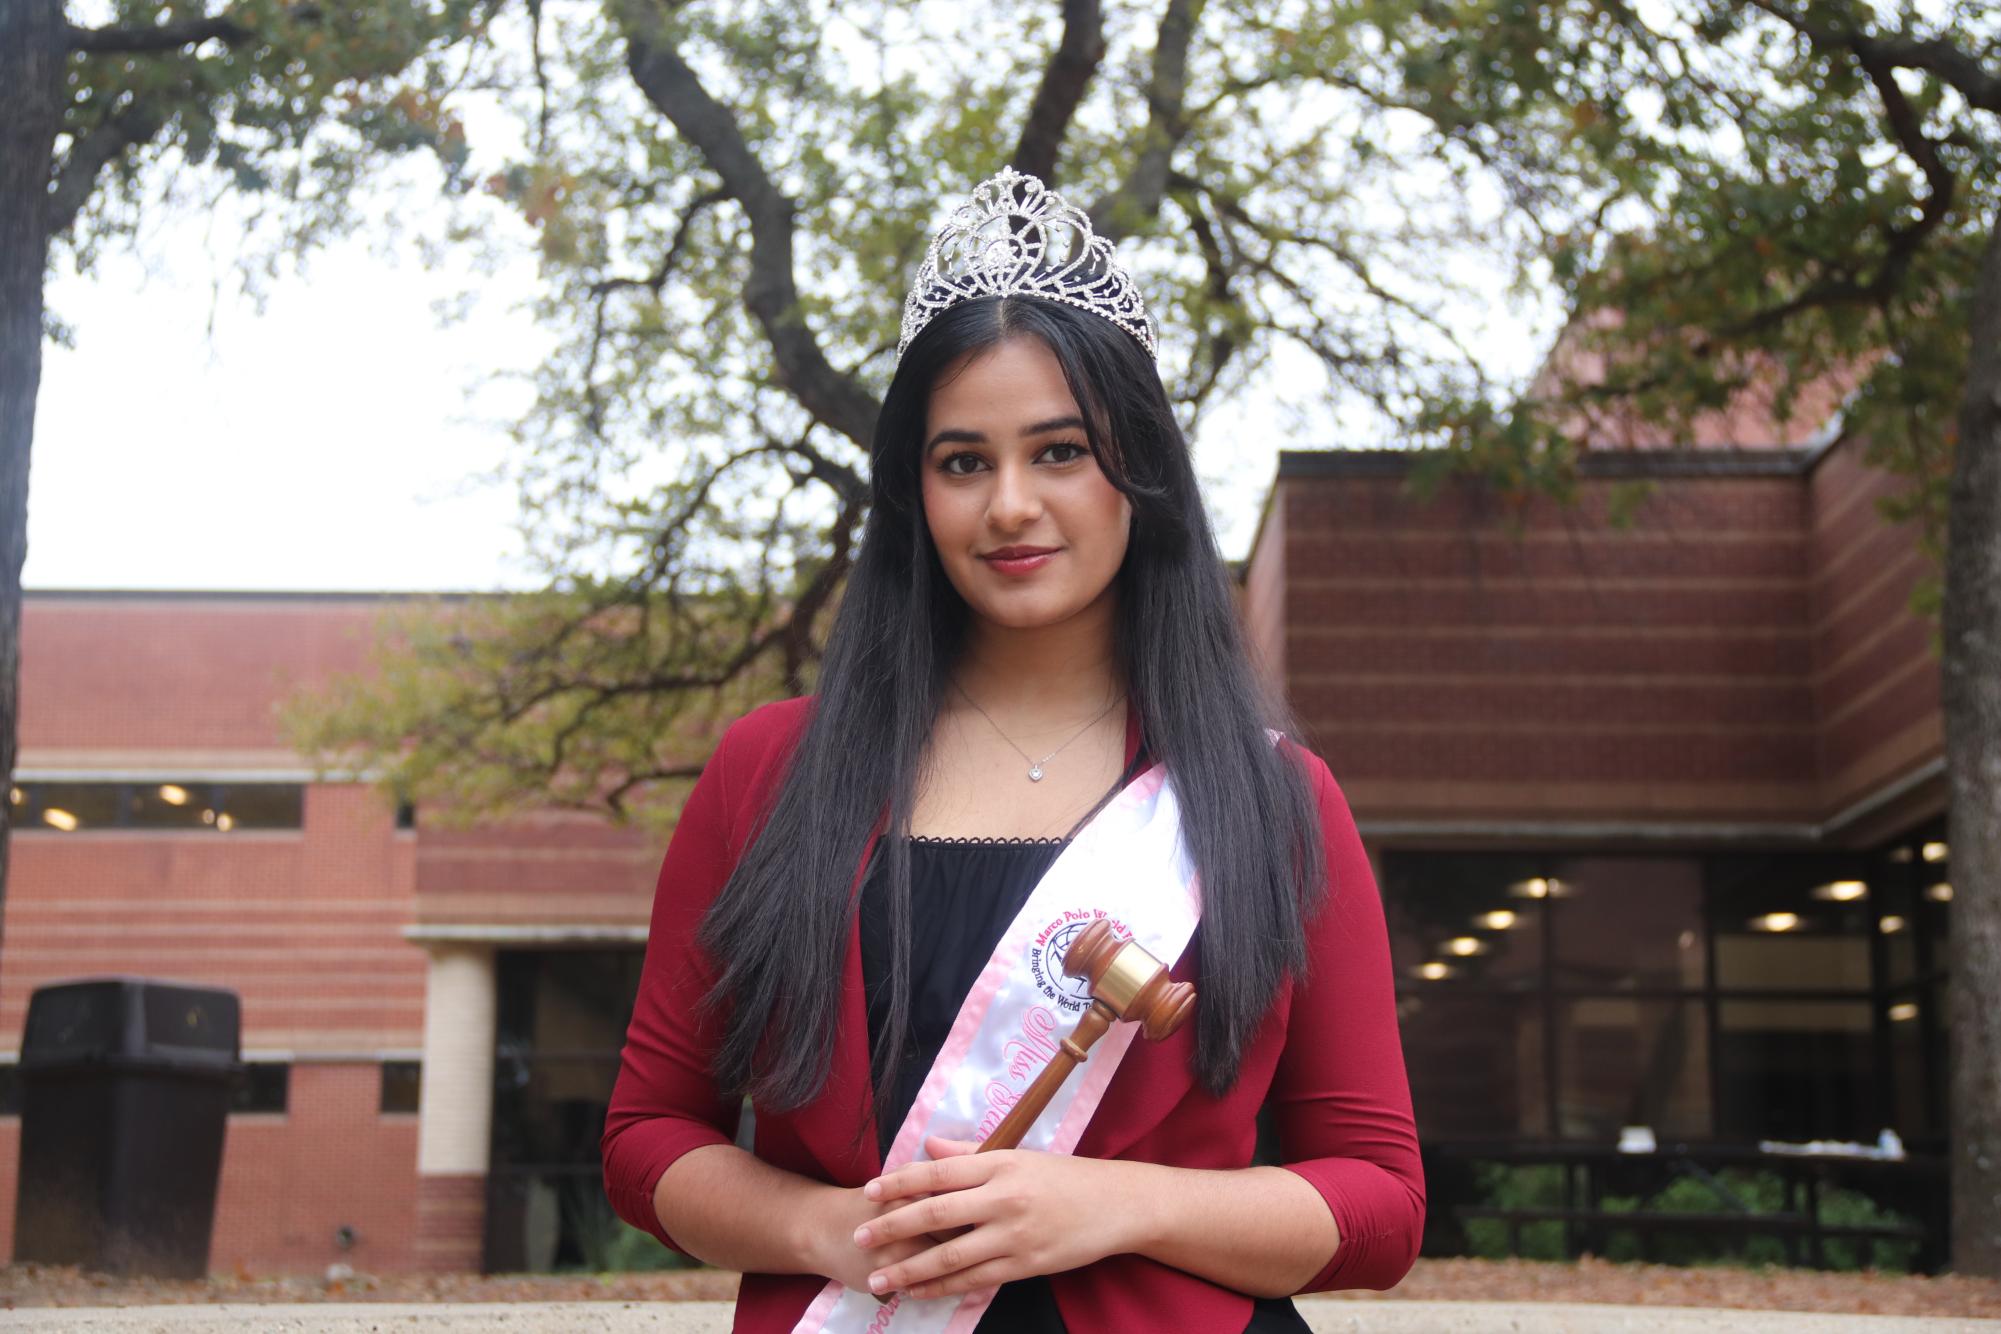 Coppell High School senior Anusha Narway was named among the 250 regional finalists announced on Jan. 11. out of a pool of 103,800 students nationwide for her excellence and skills. 